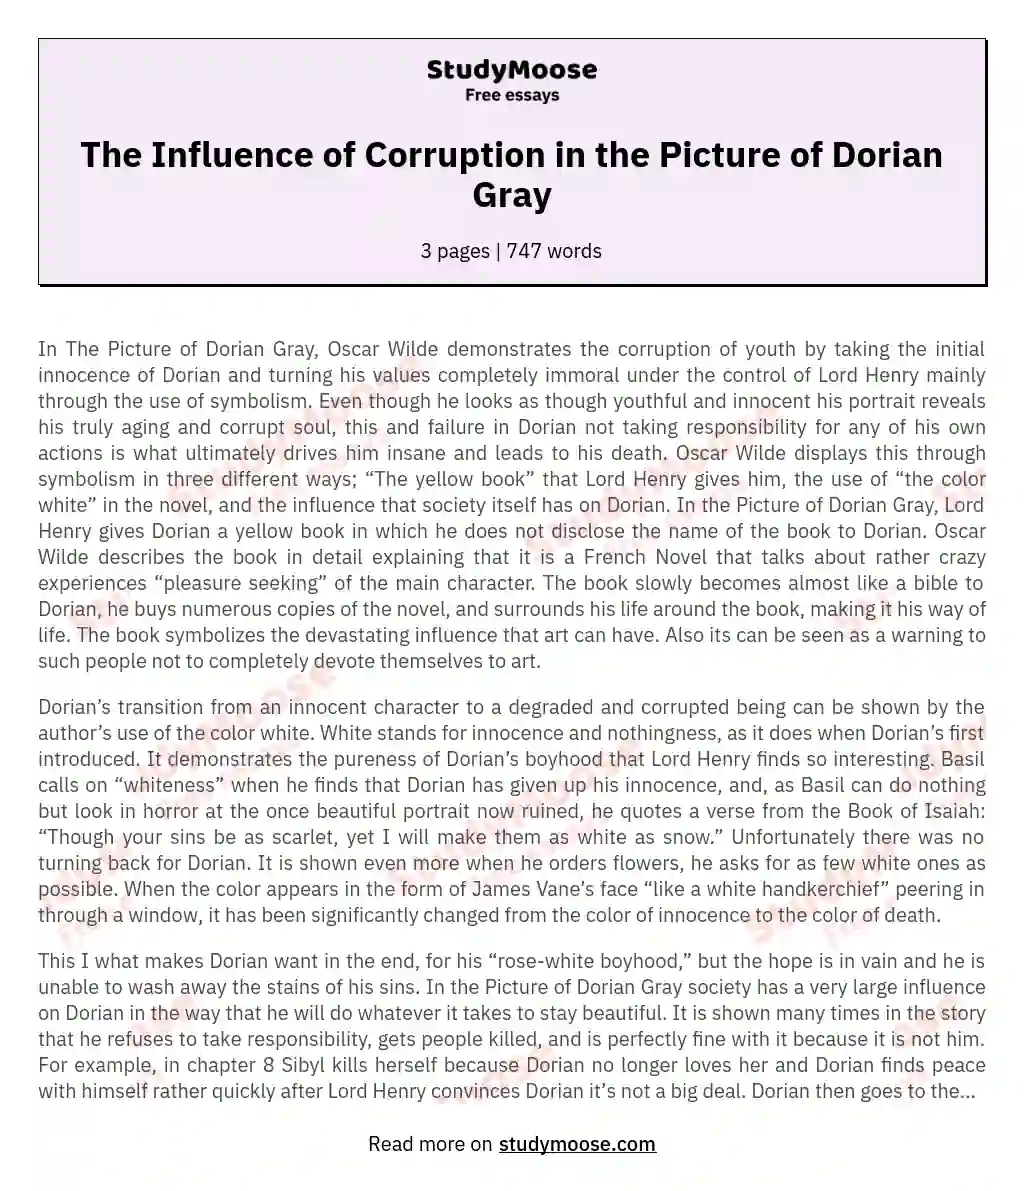 The Influence of Corruption in the Picture of Dorian Gray essay